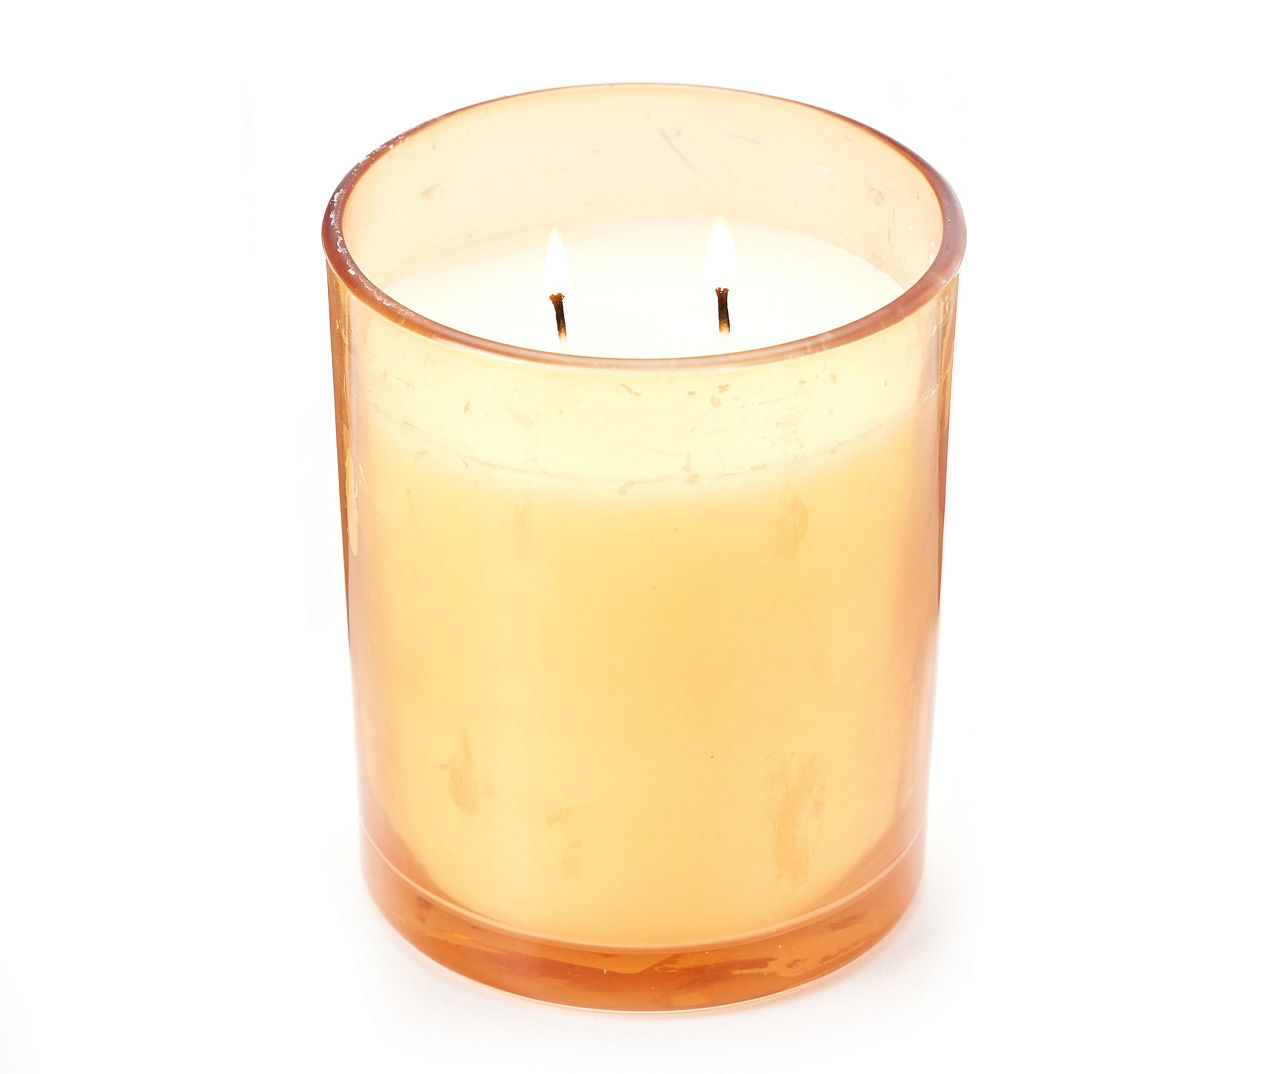 Bowling Alley Oops Scented Candles sold by Gorge Tuesday, SKU 51196033